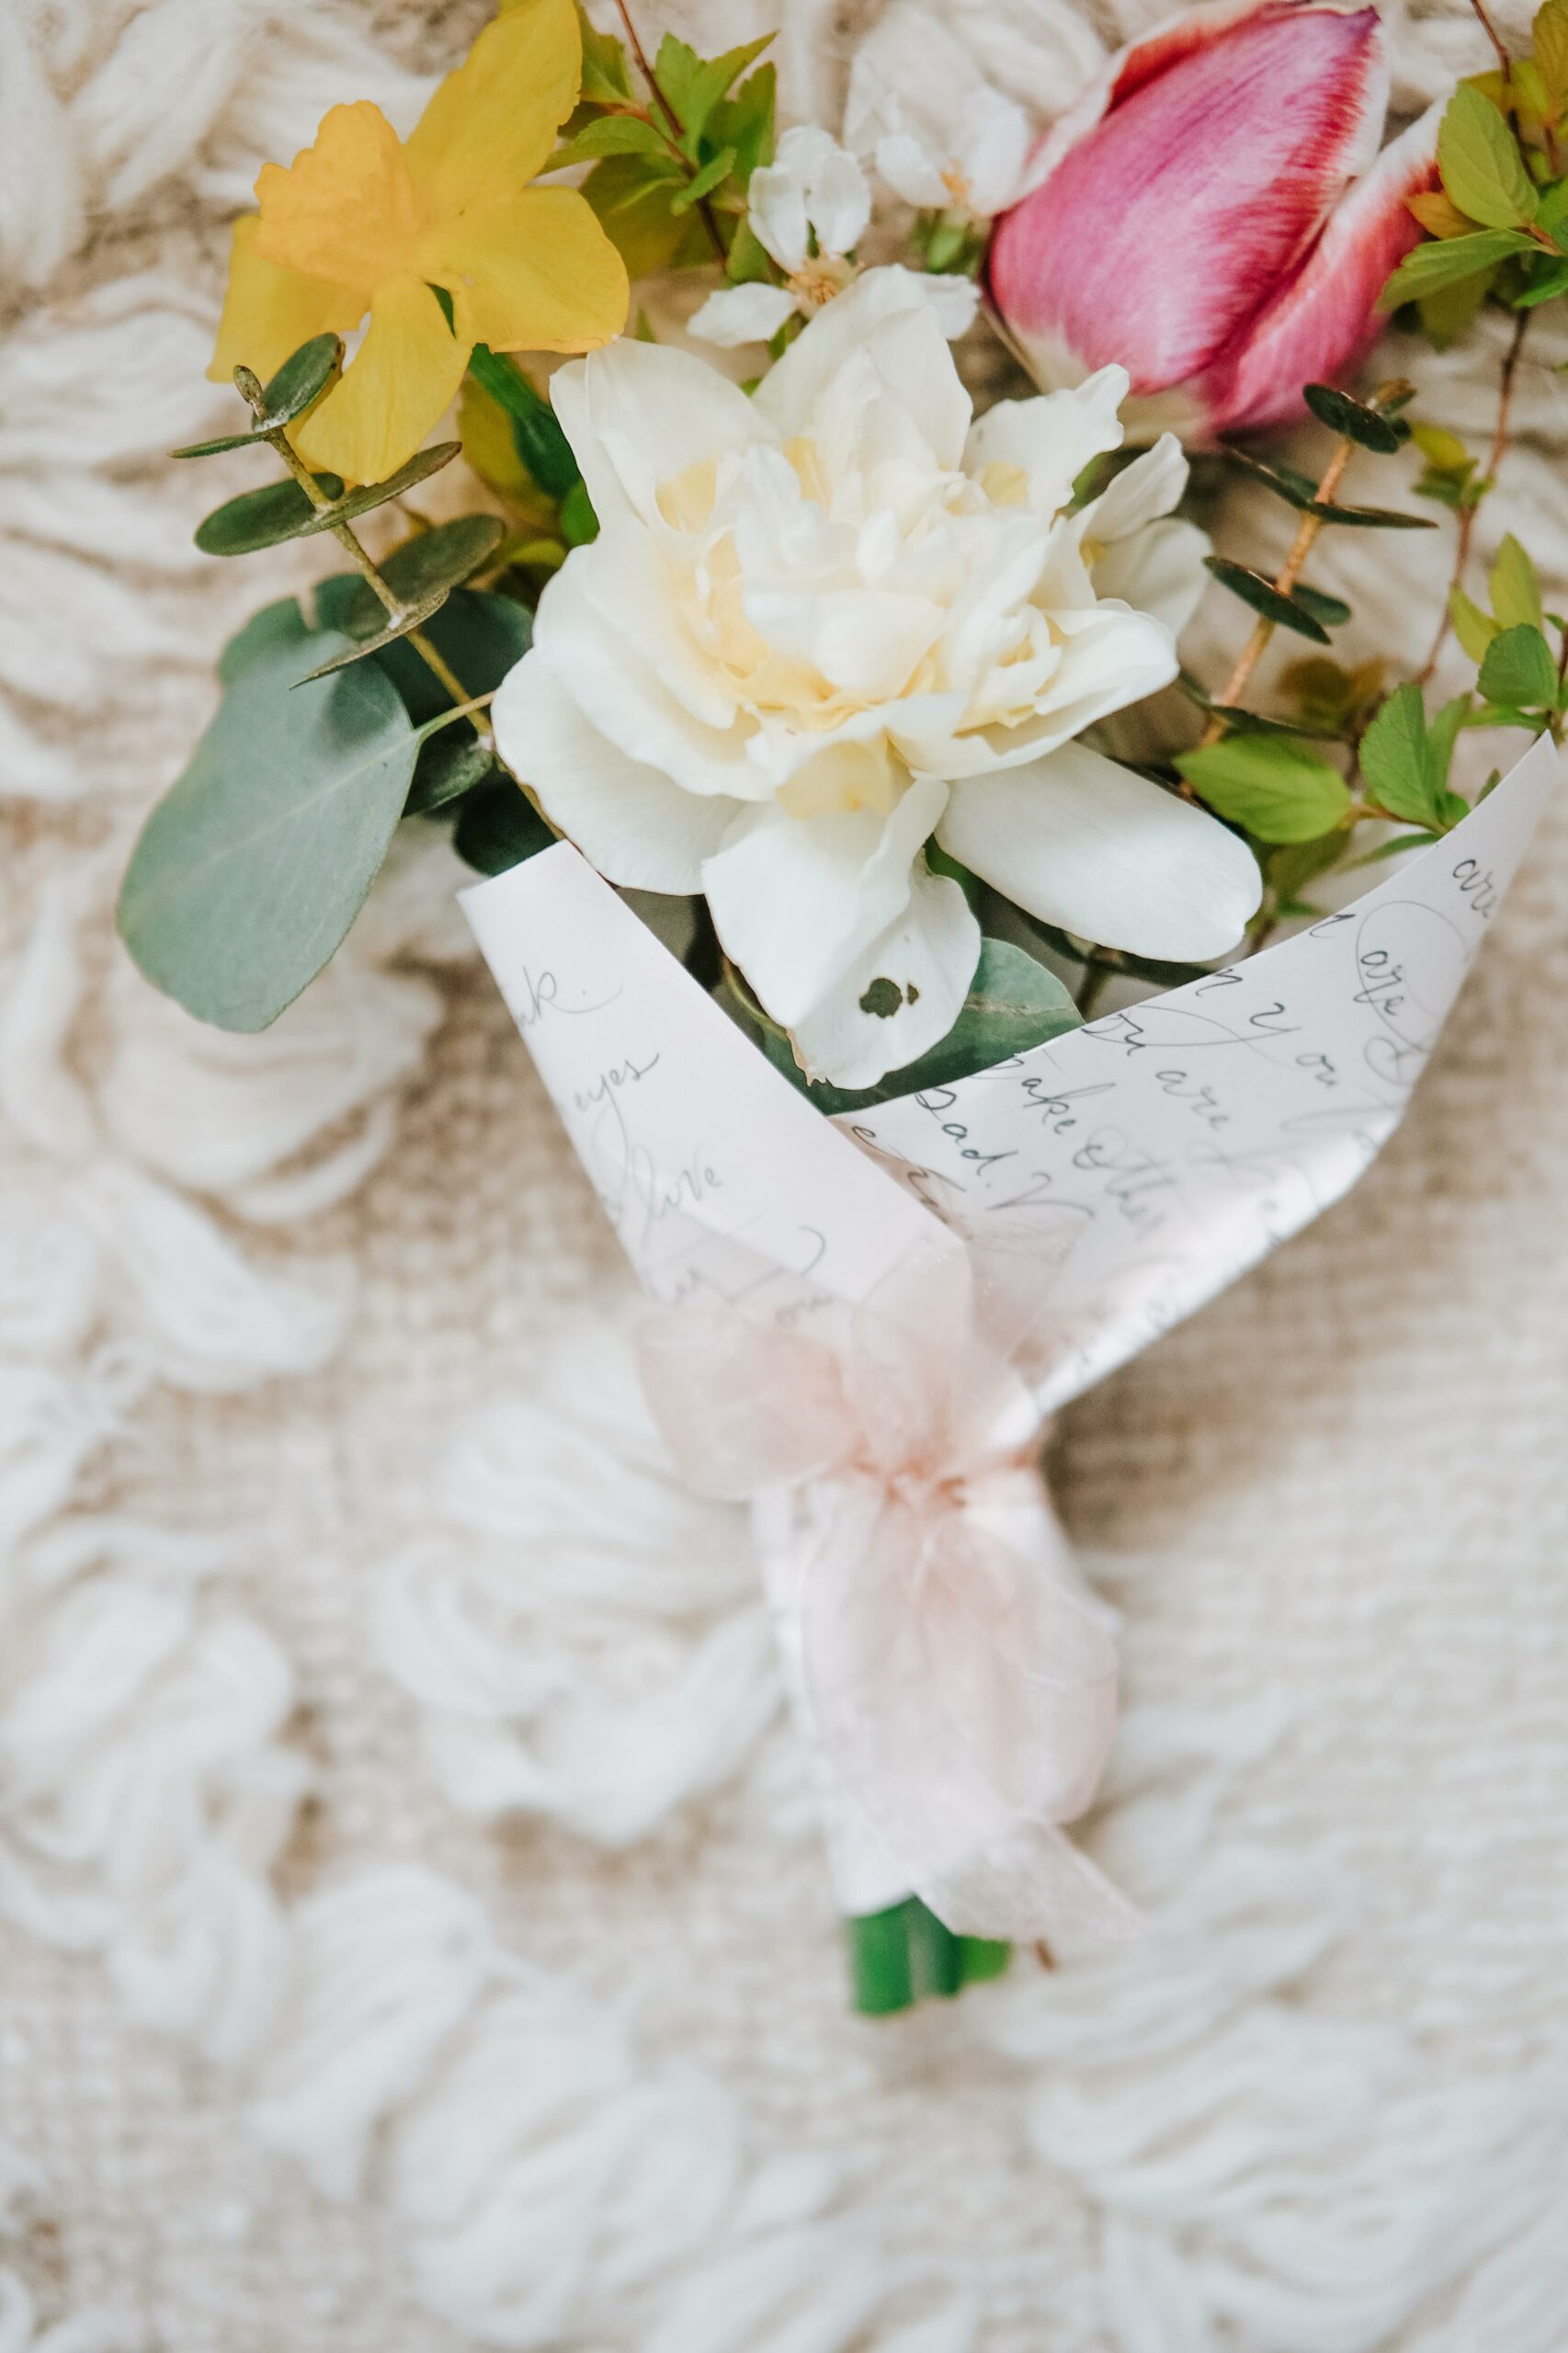 Petite Paper-Wrapped Bouquets Project